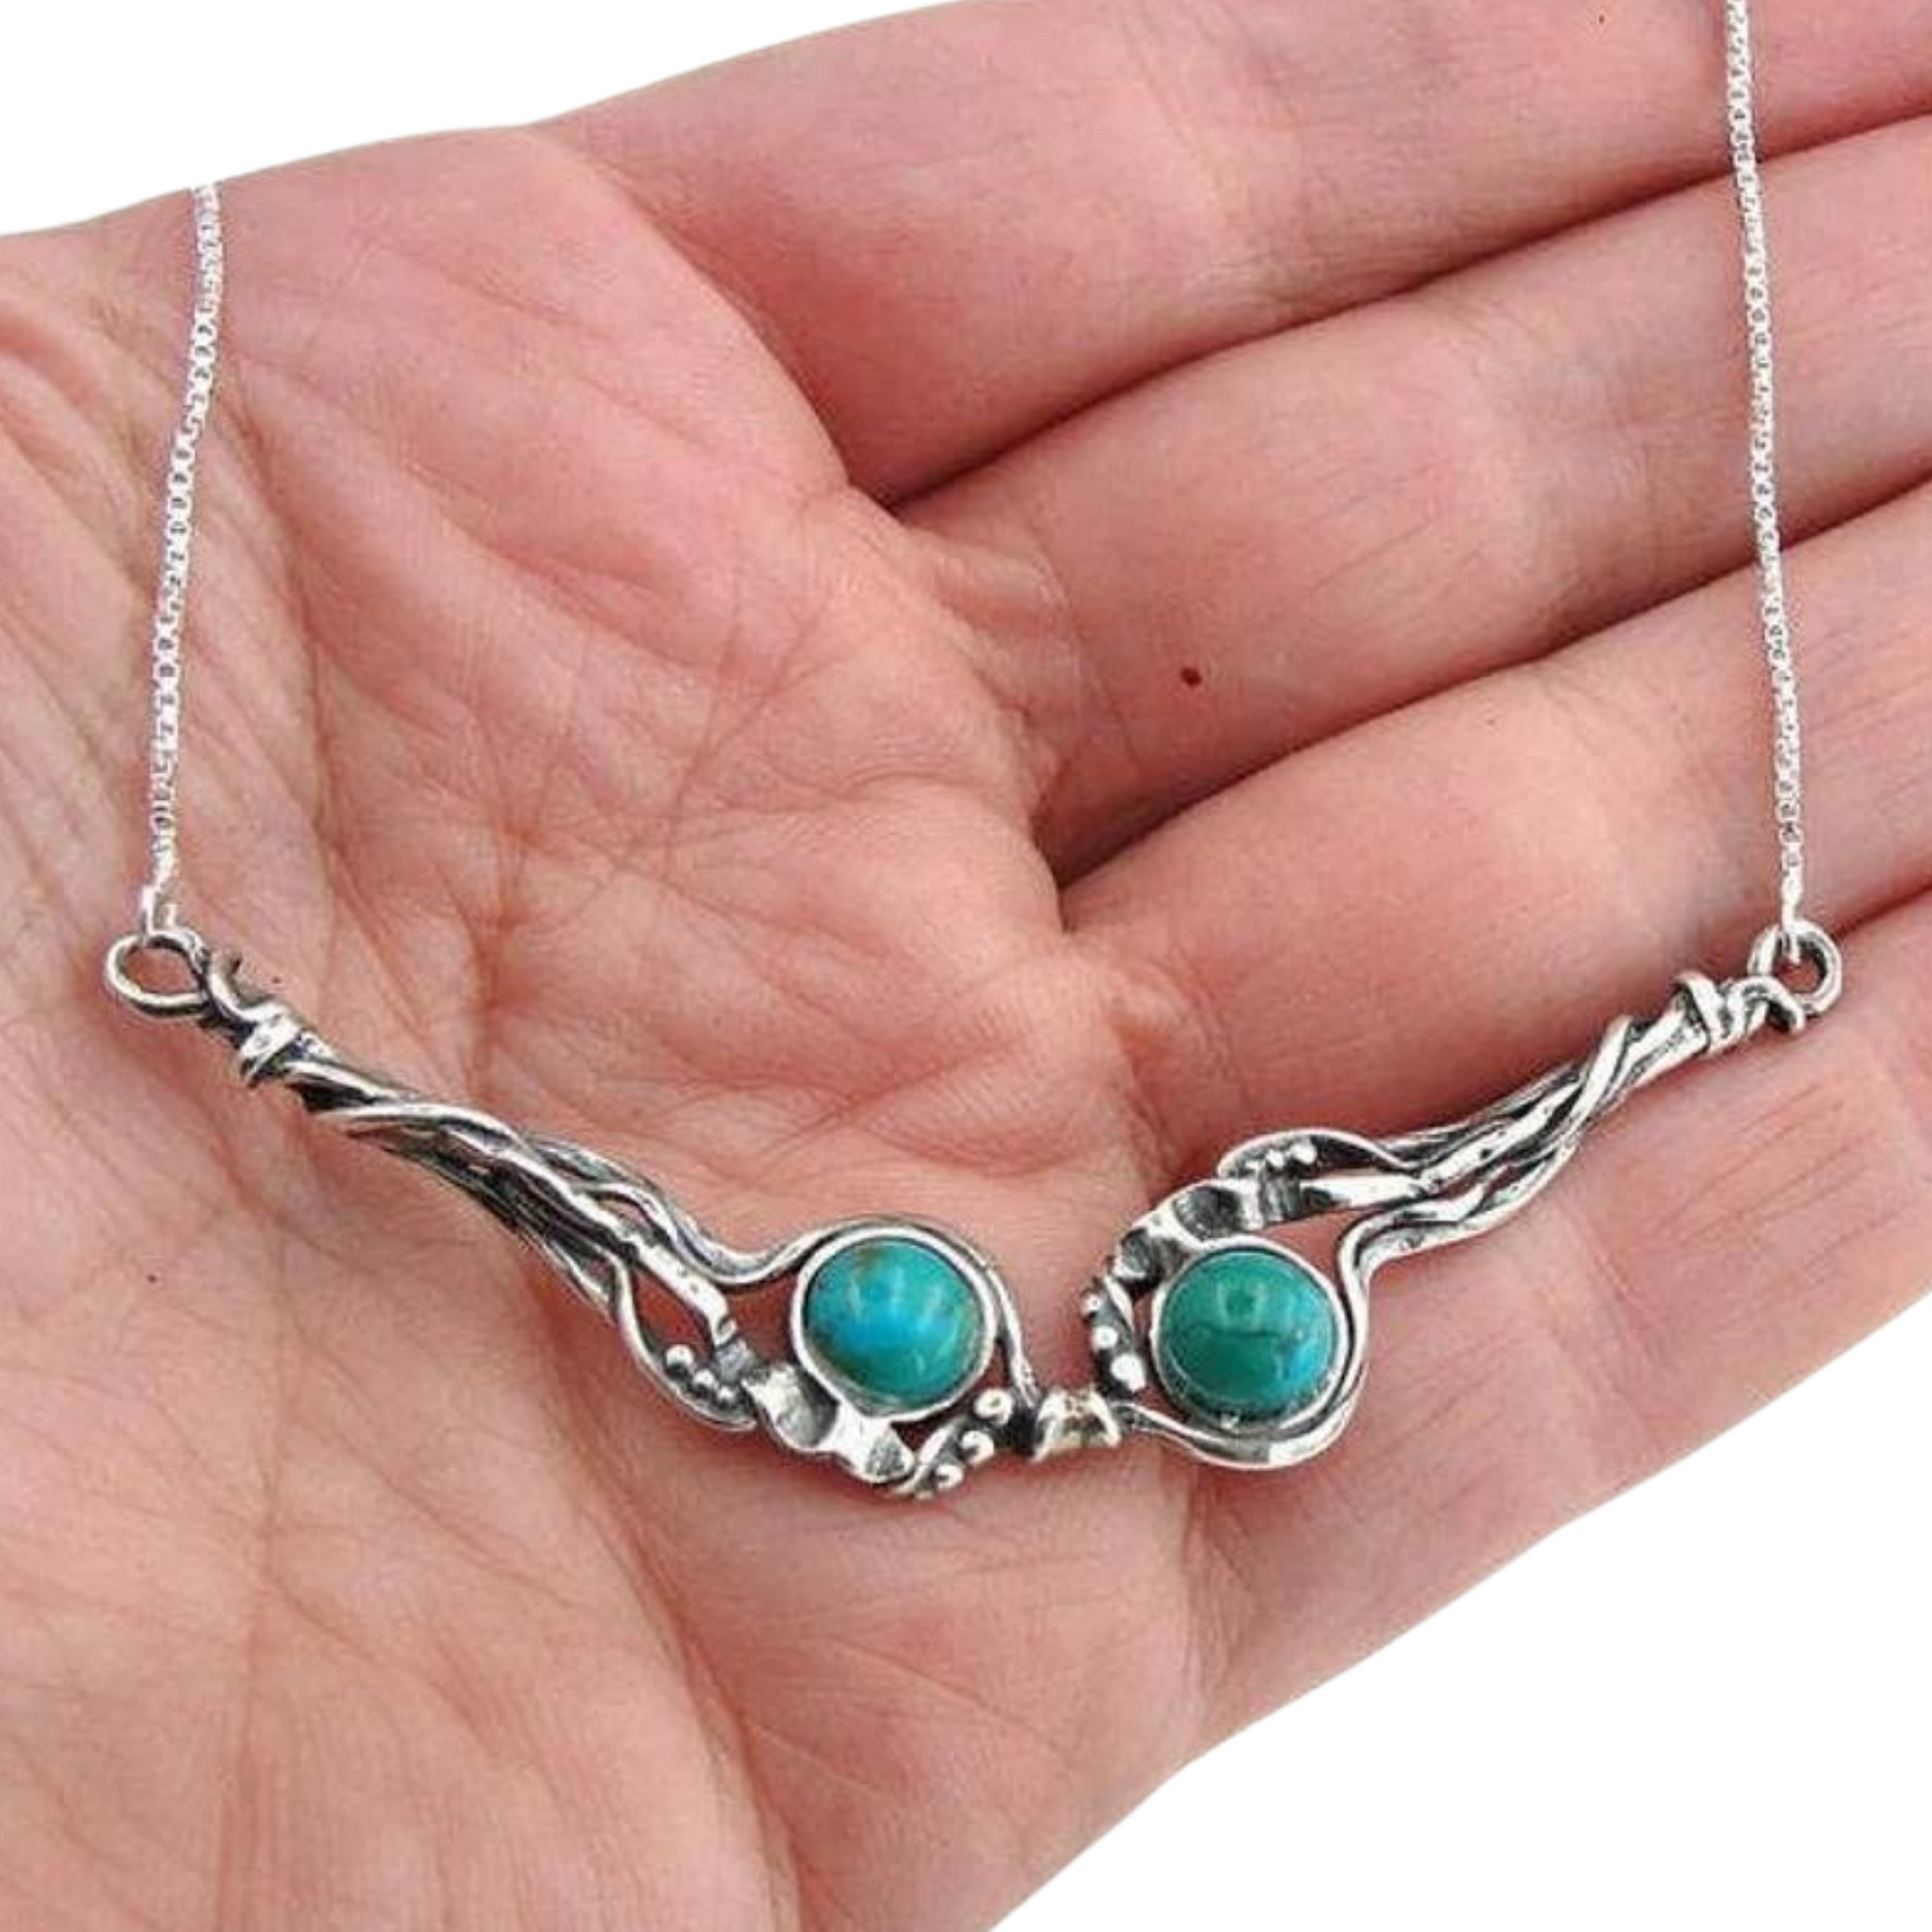 Sterling silver pendant with Natural Turquoise Gemstones, arrive with sterling silver Necklace, Gift for her, handmade turquoise necklace, Israeli Jewelry, Israeli design, gift for wife, unisex Necklace, men Necklace, gift for daughter, Solid Silver